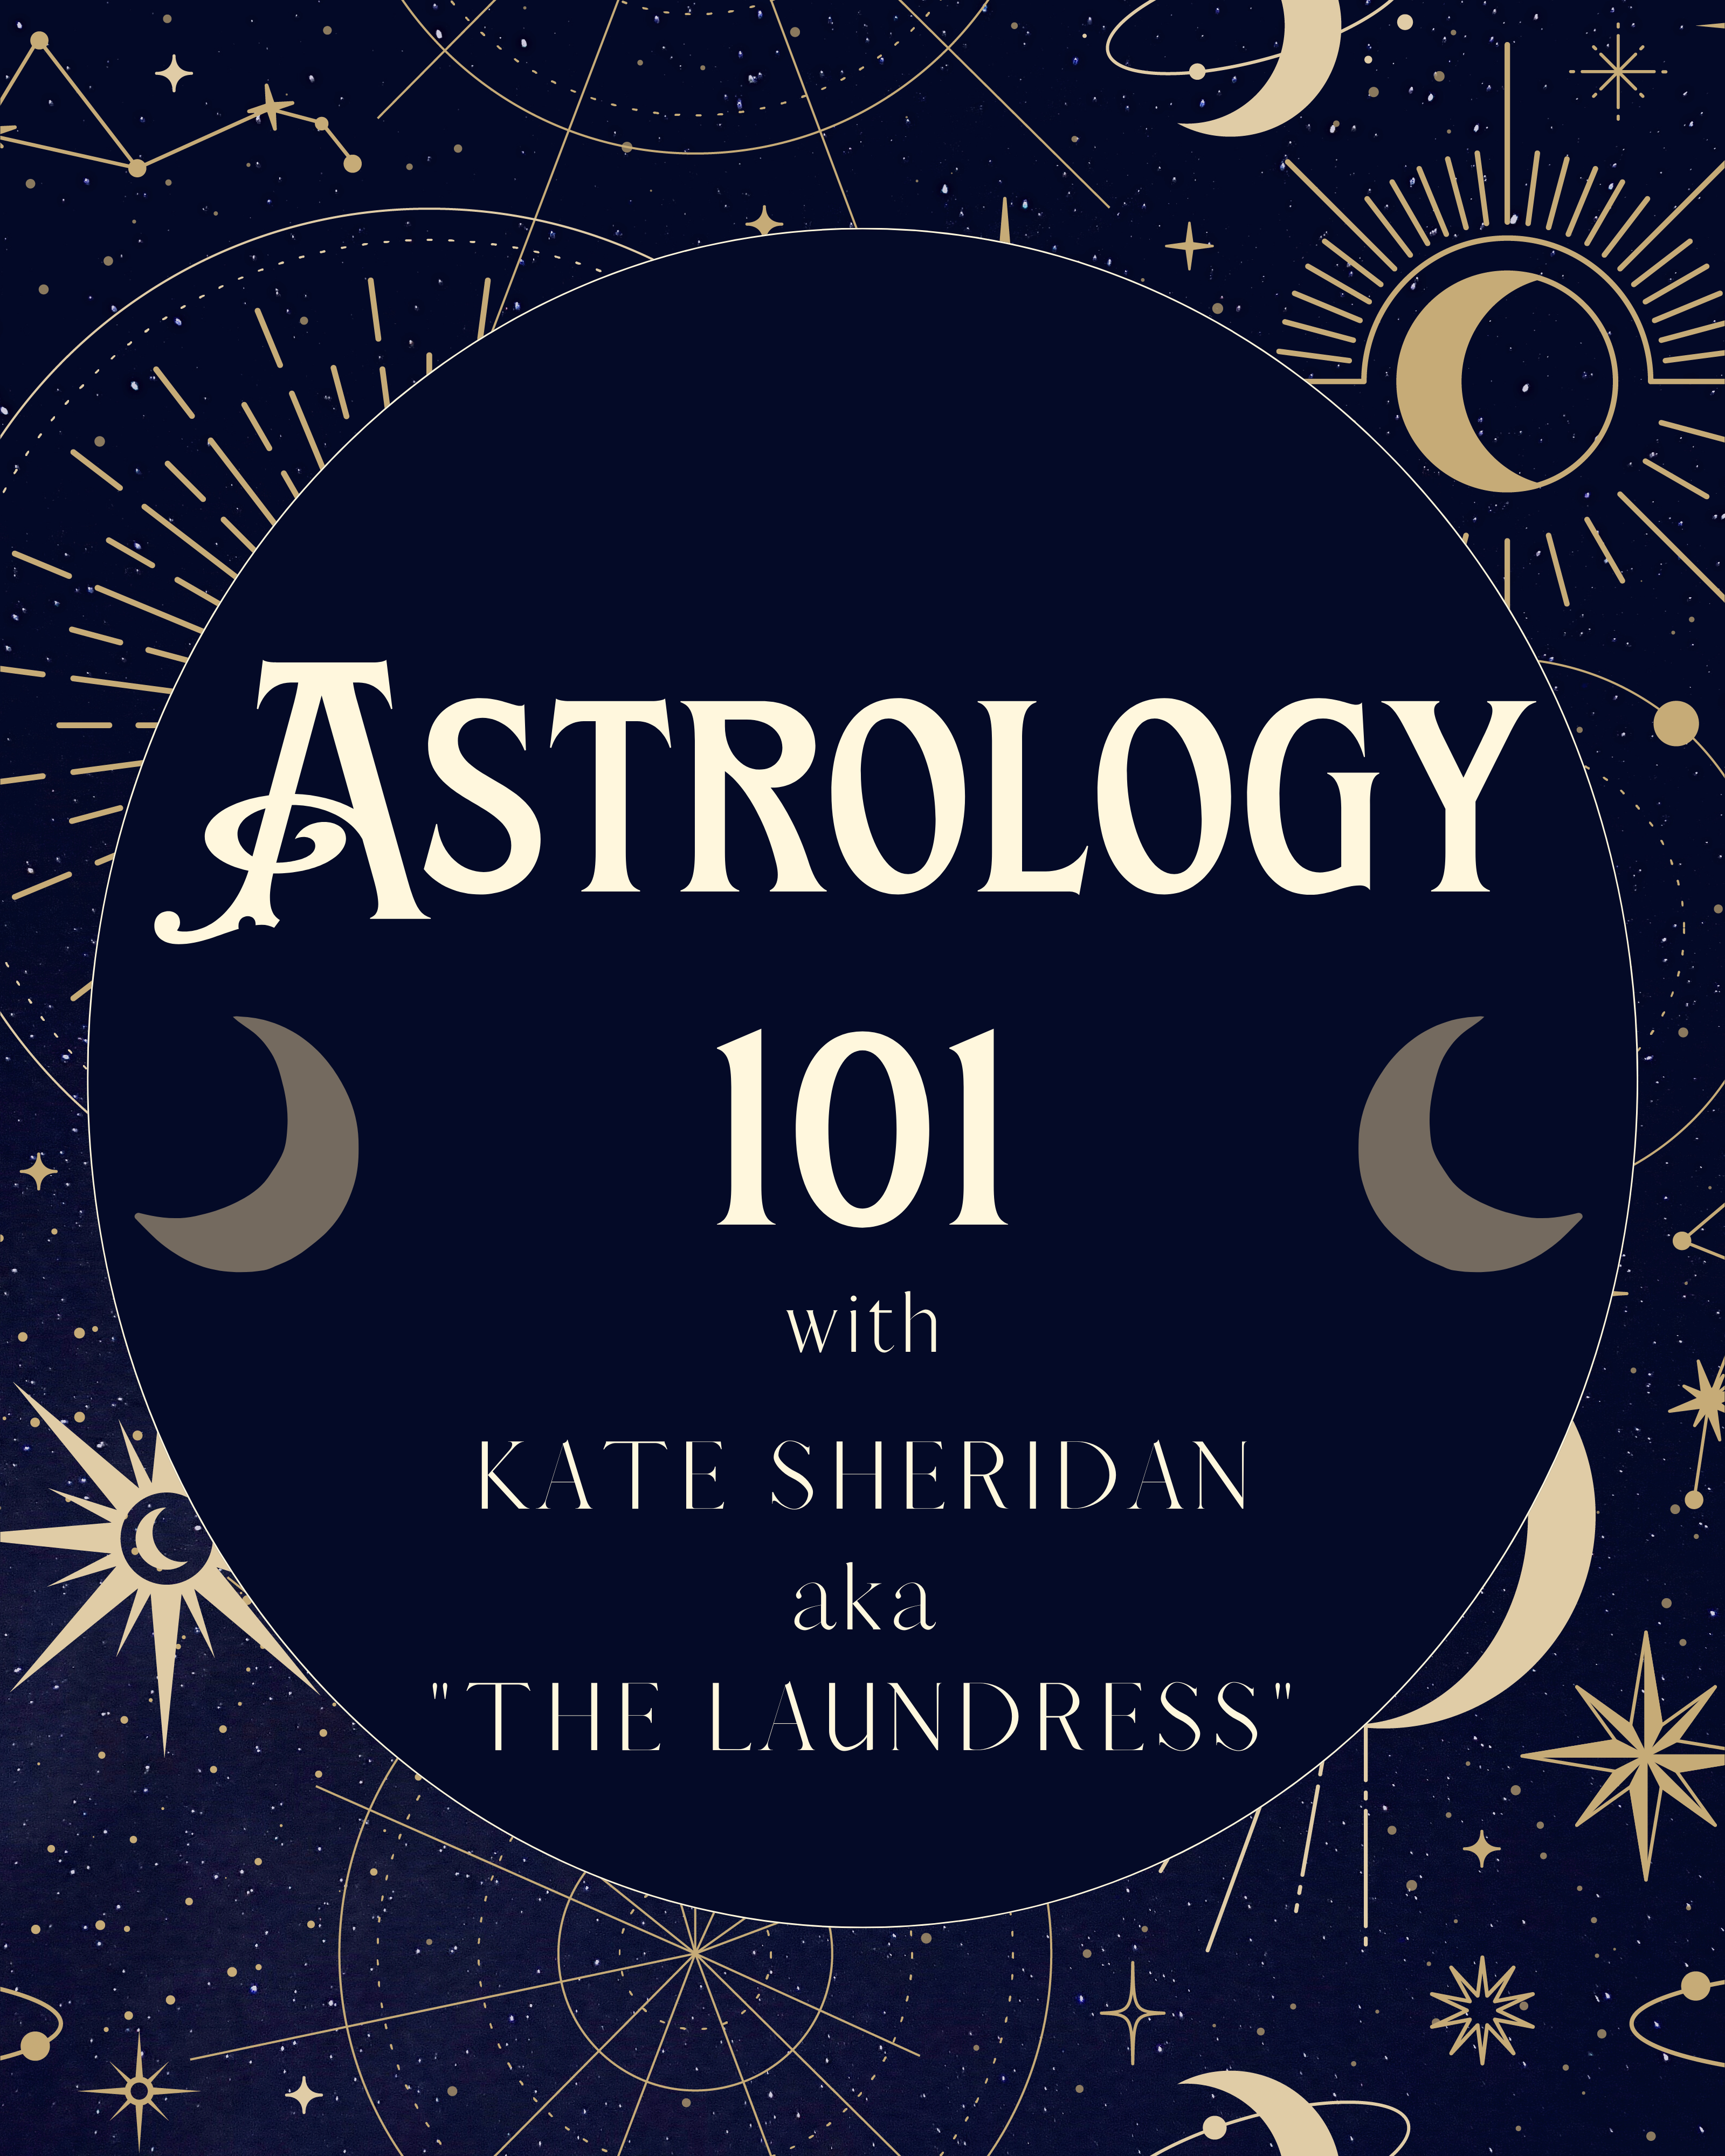 Astrology 101 with Kate Sheridan AKA The Laundress Moons and Stars. 